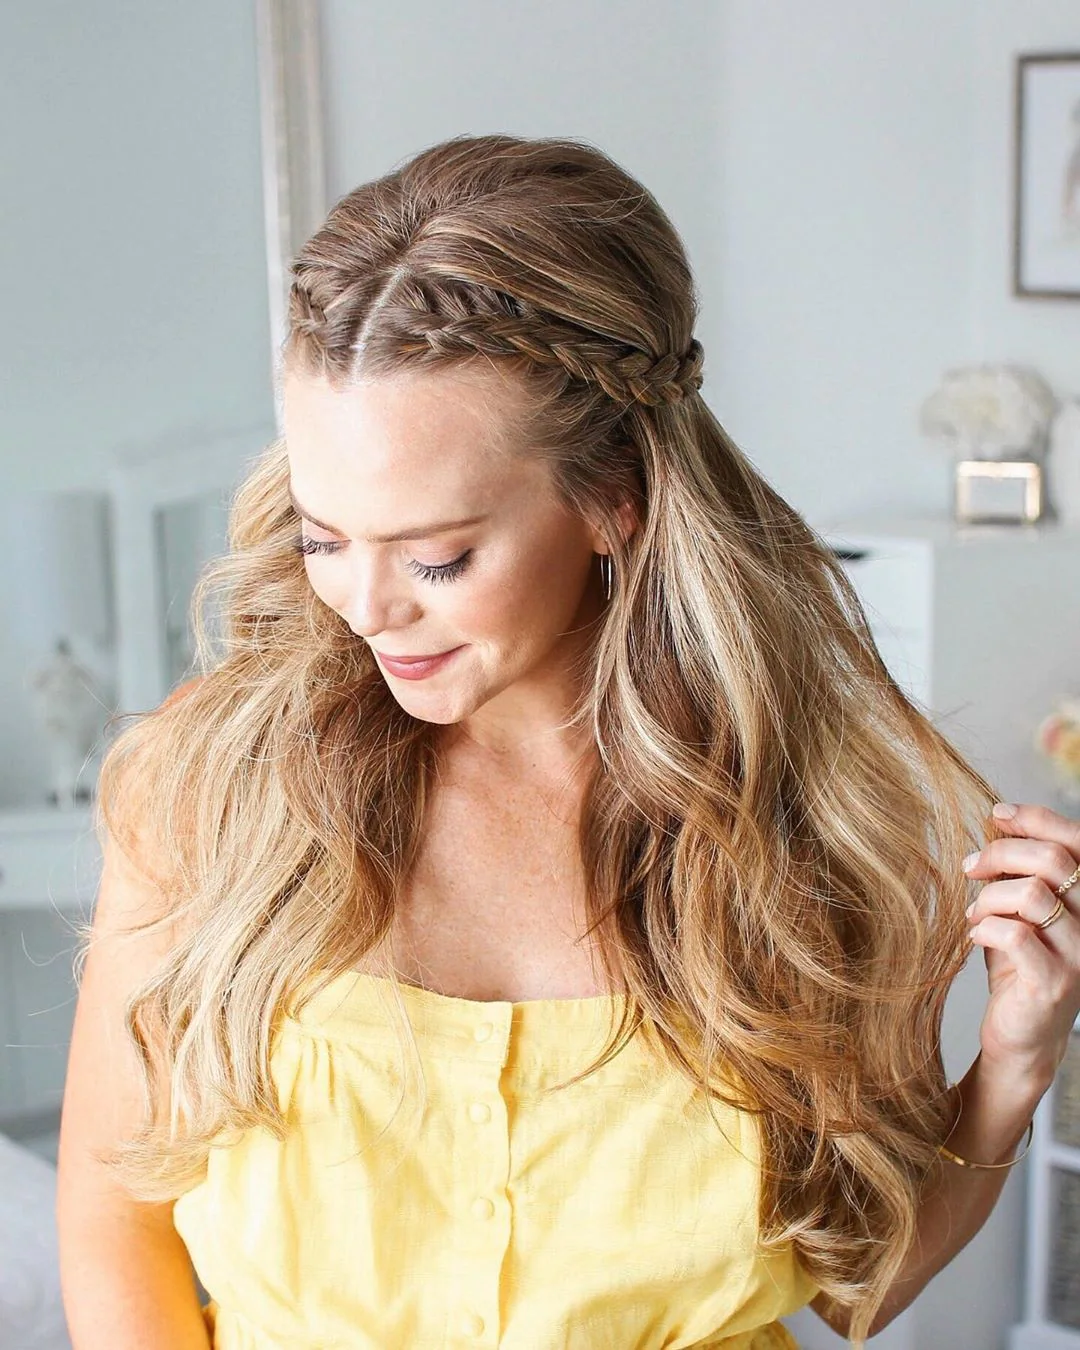 20 Easiest Hairstyles for Long Hair That Girls Need to Try